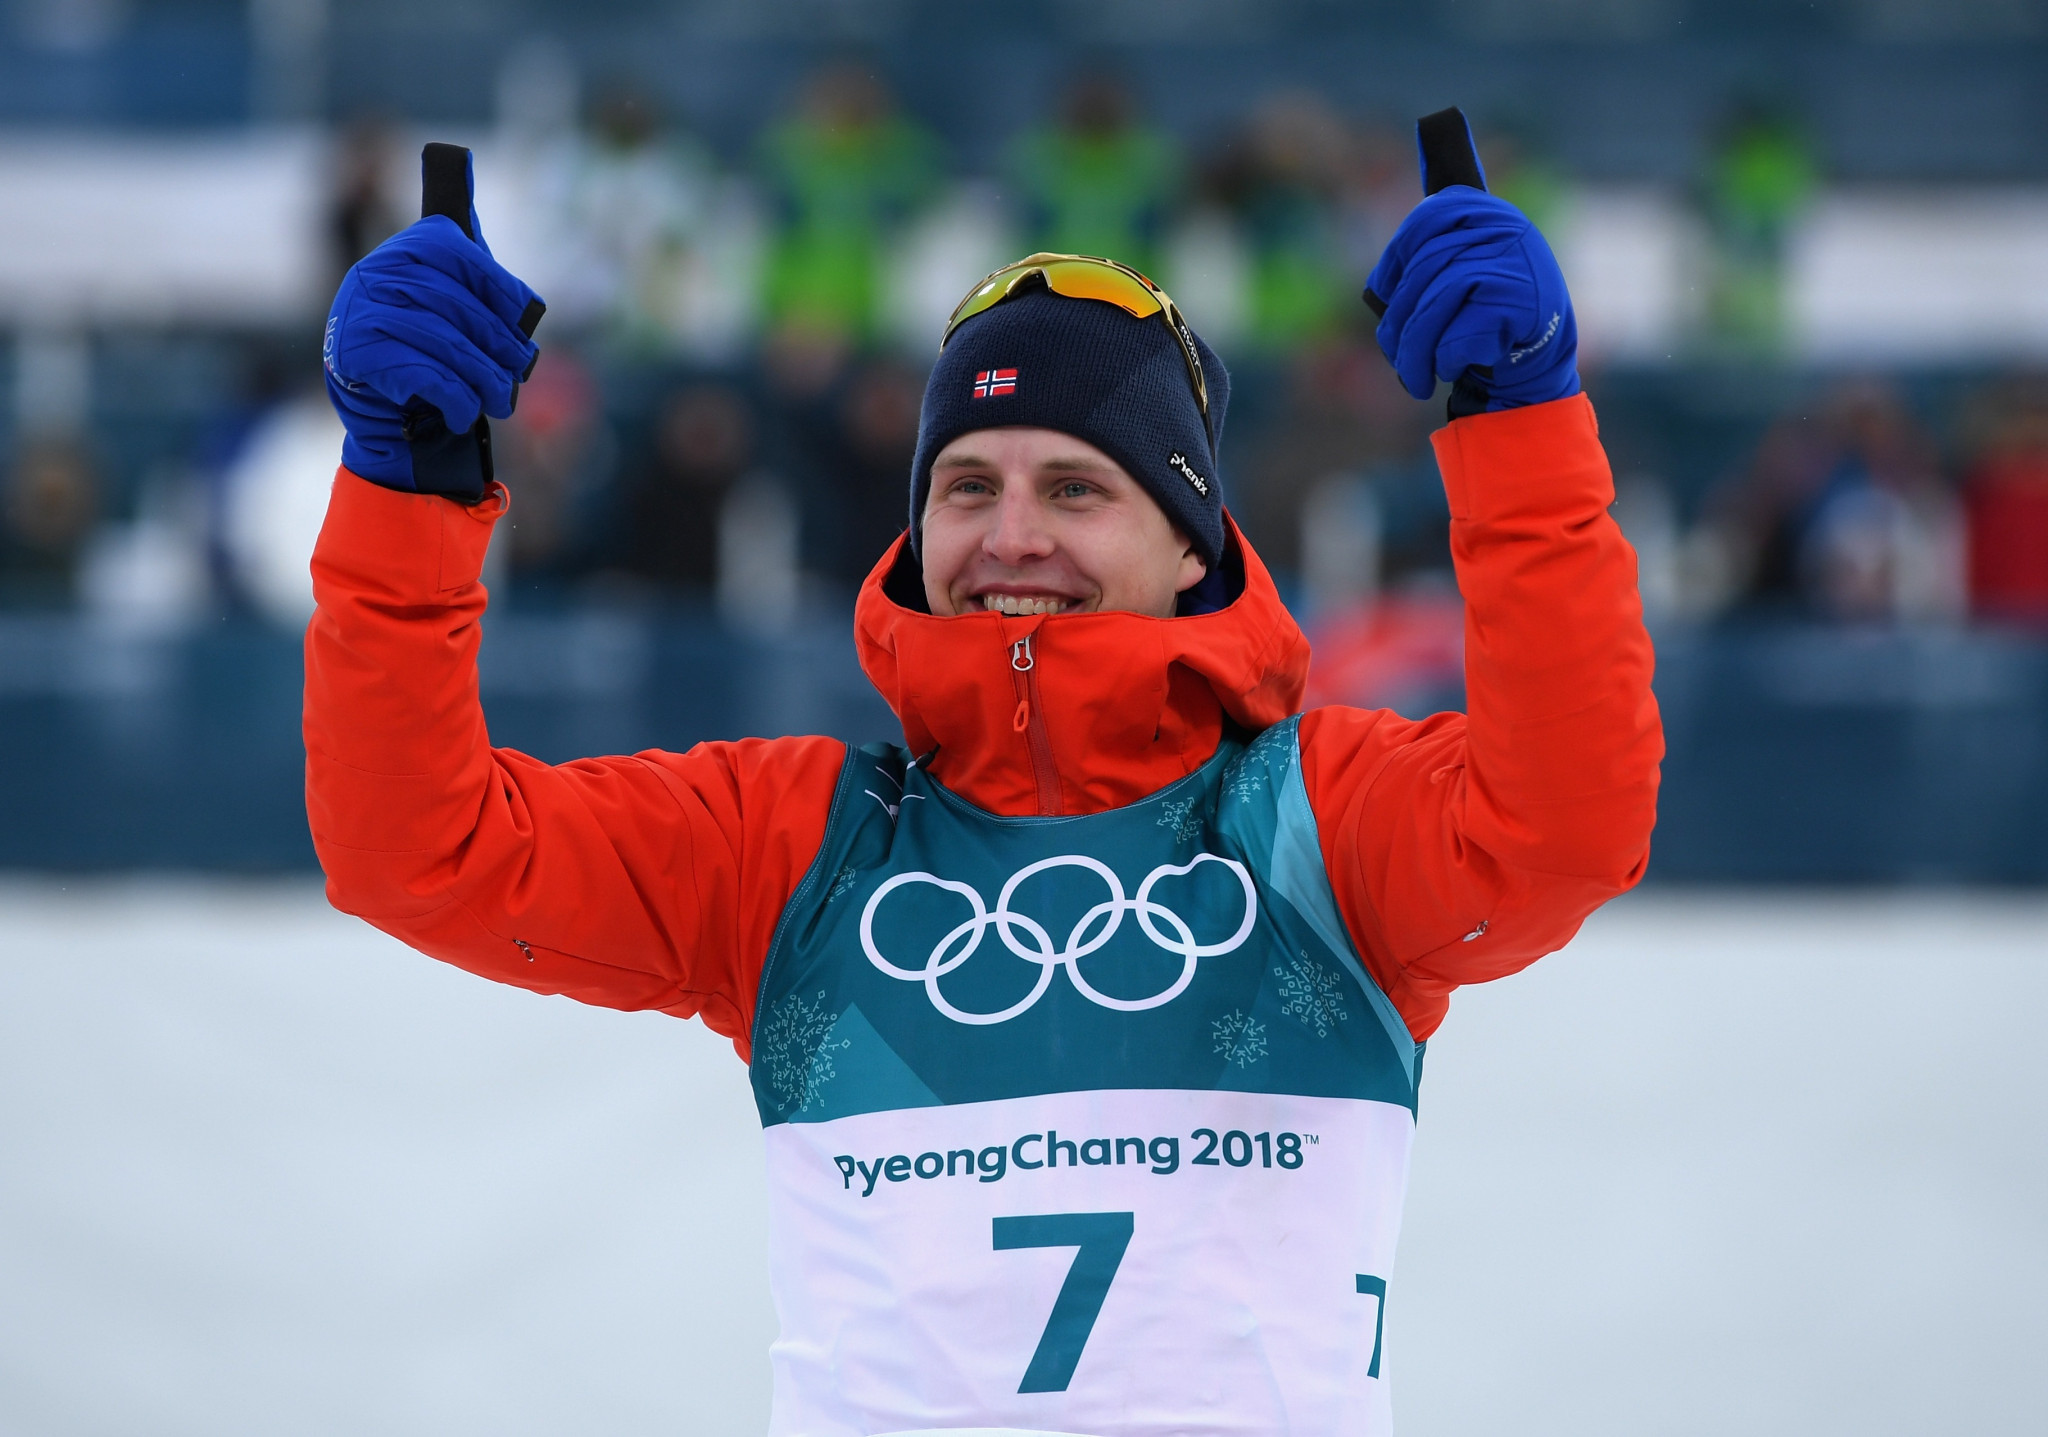 Simen Hegstad Krueger of Norway recovered from a first lap crash to win the men's skiathlon in cross country skiing ©Getty Images